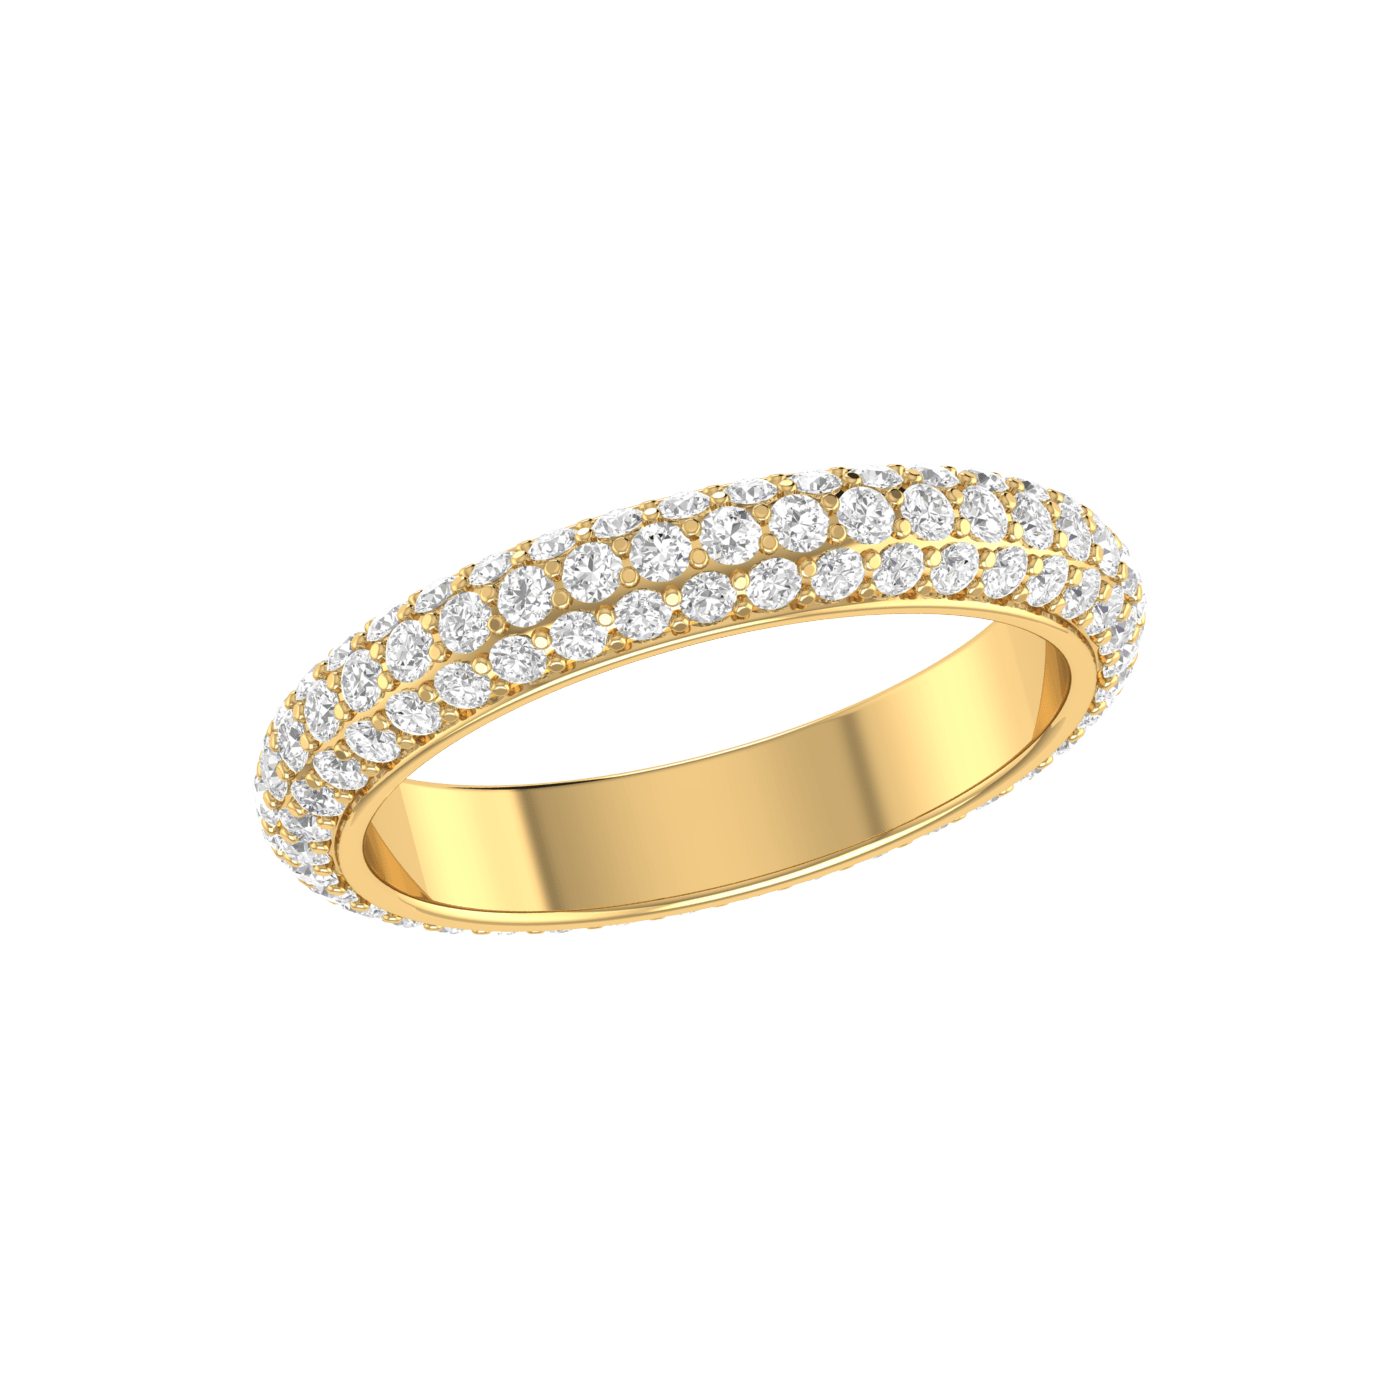 Women's KGR 15699 Emerald and Diamond Ring 18K Yellow Gold at Rs 30790.50  in Jaipur